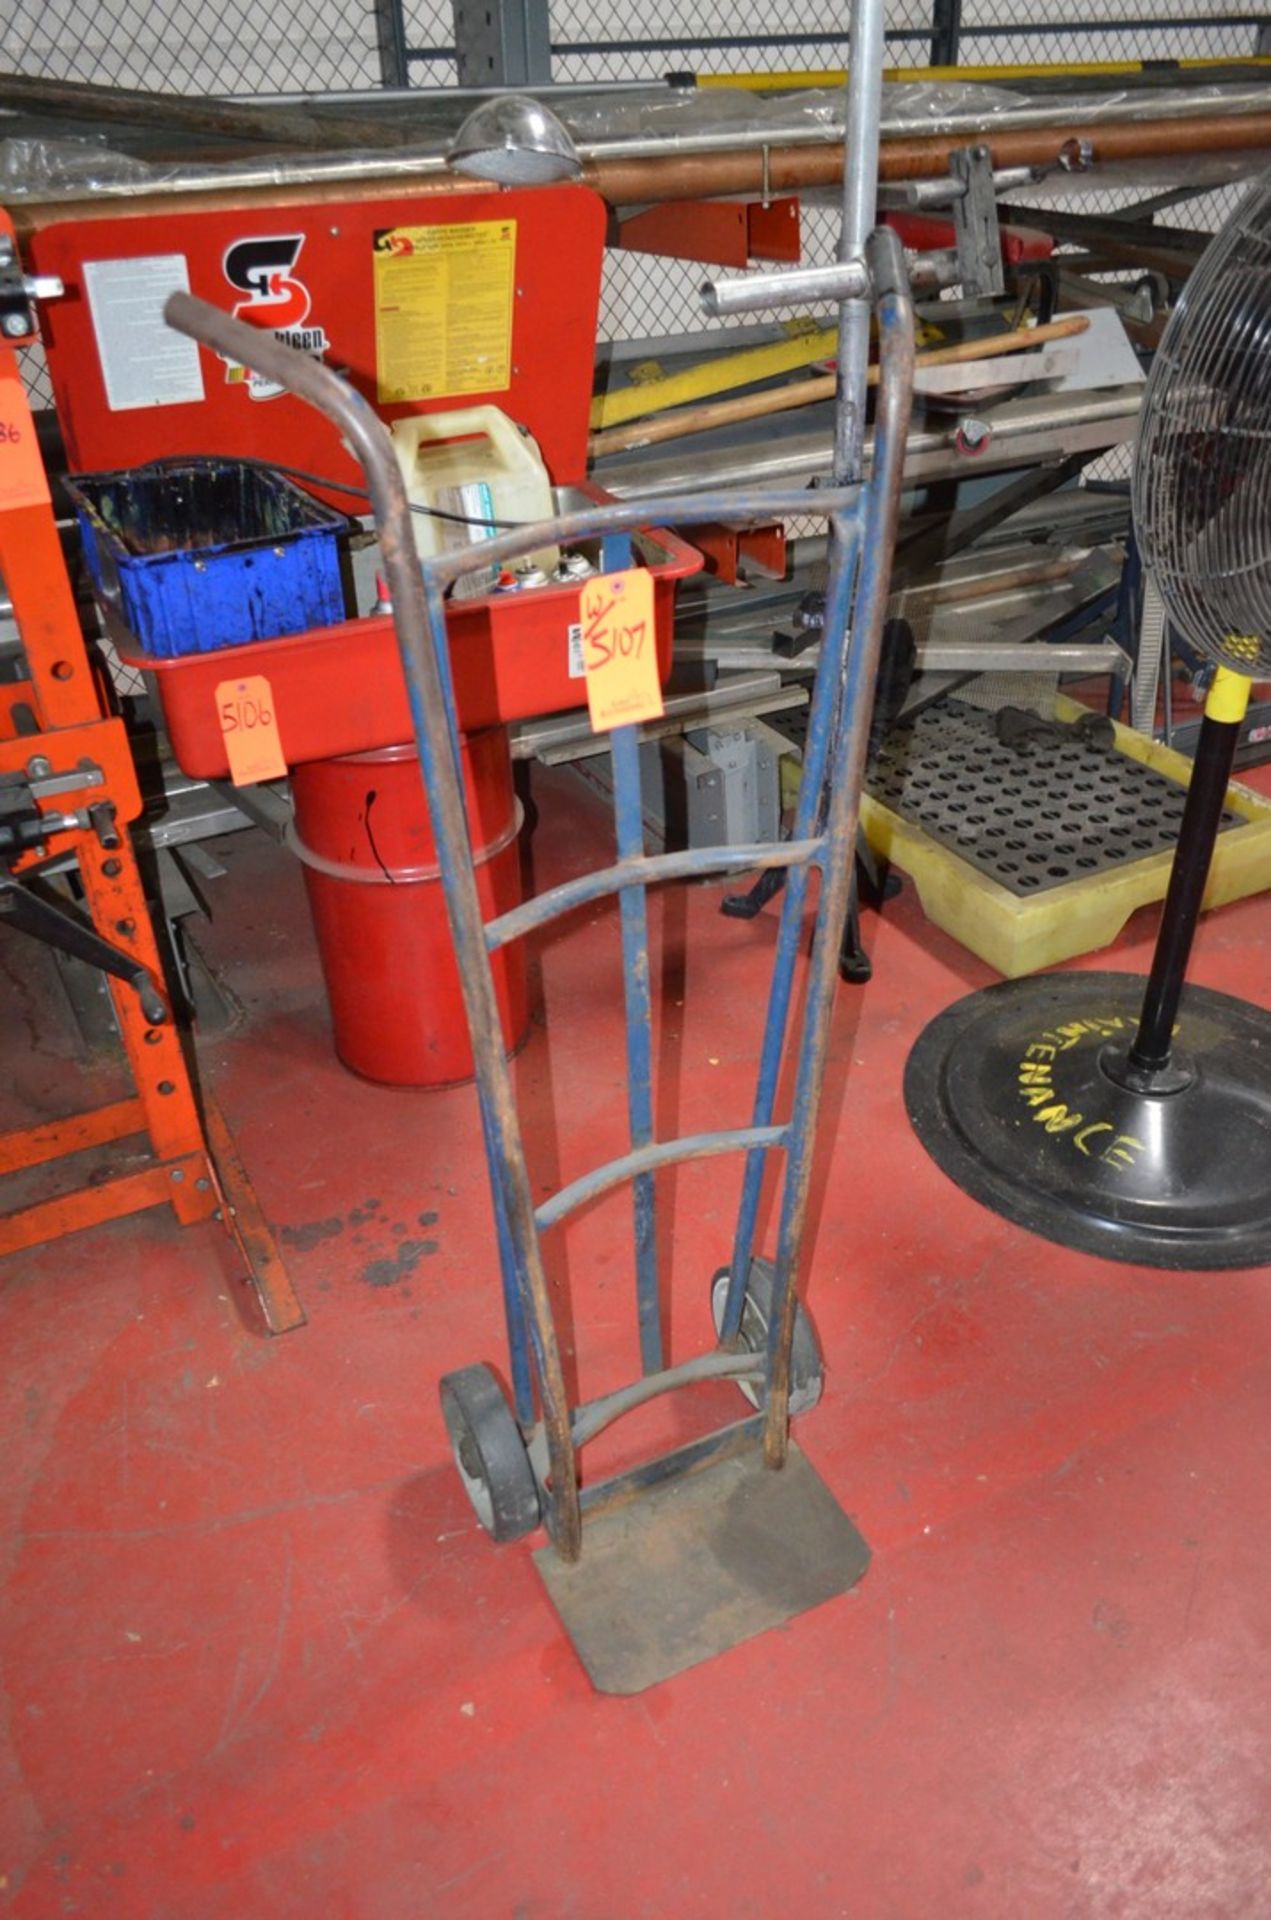 Lot - Misc. Shop Equipment To Include; (2) 32' Fiber Glass Extension Ladders, Hand Truck, Pedestal - Image 6 of 8